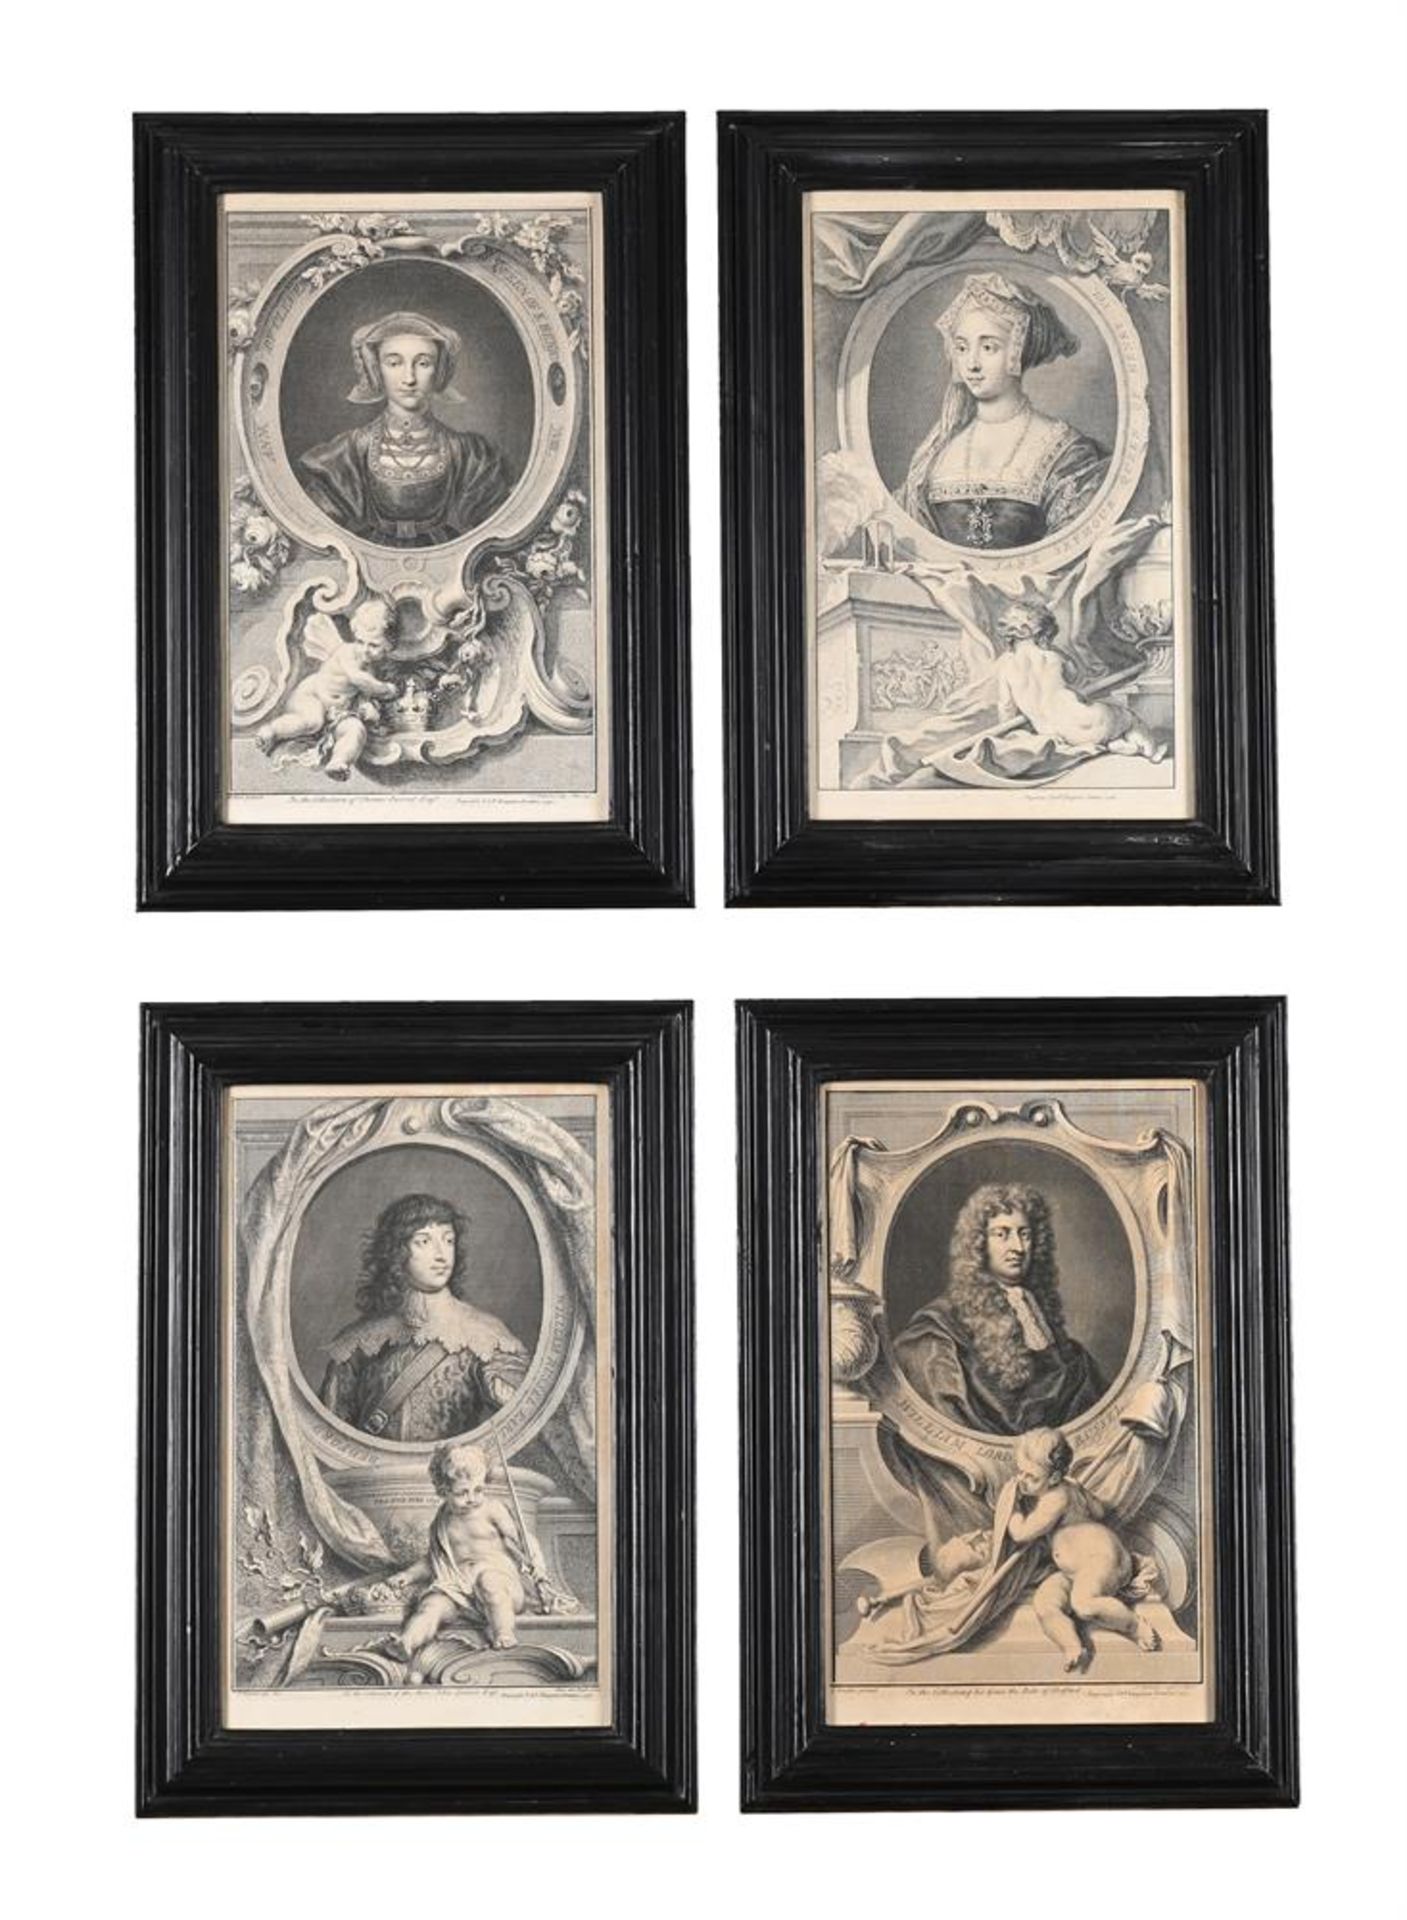 JACOBUS HOUBRAKEN AFTER SIR ANTHONY VAN DYCK, A SET OF TEN PORTRAITS OF DUKES - Image 3 of 5